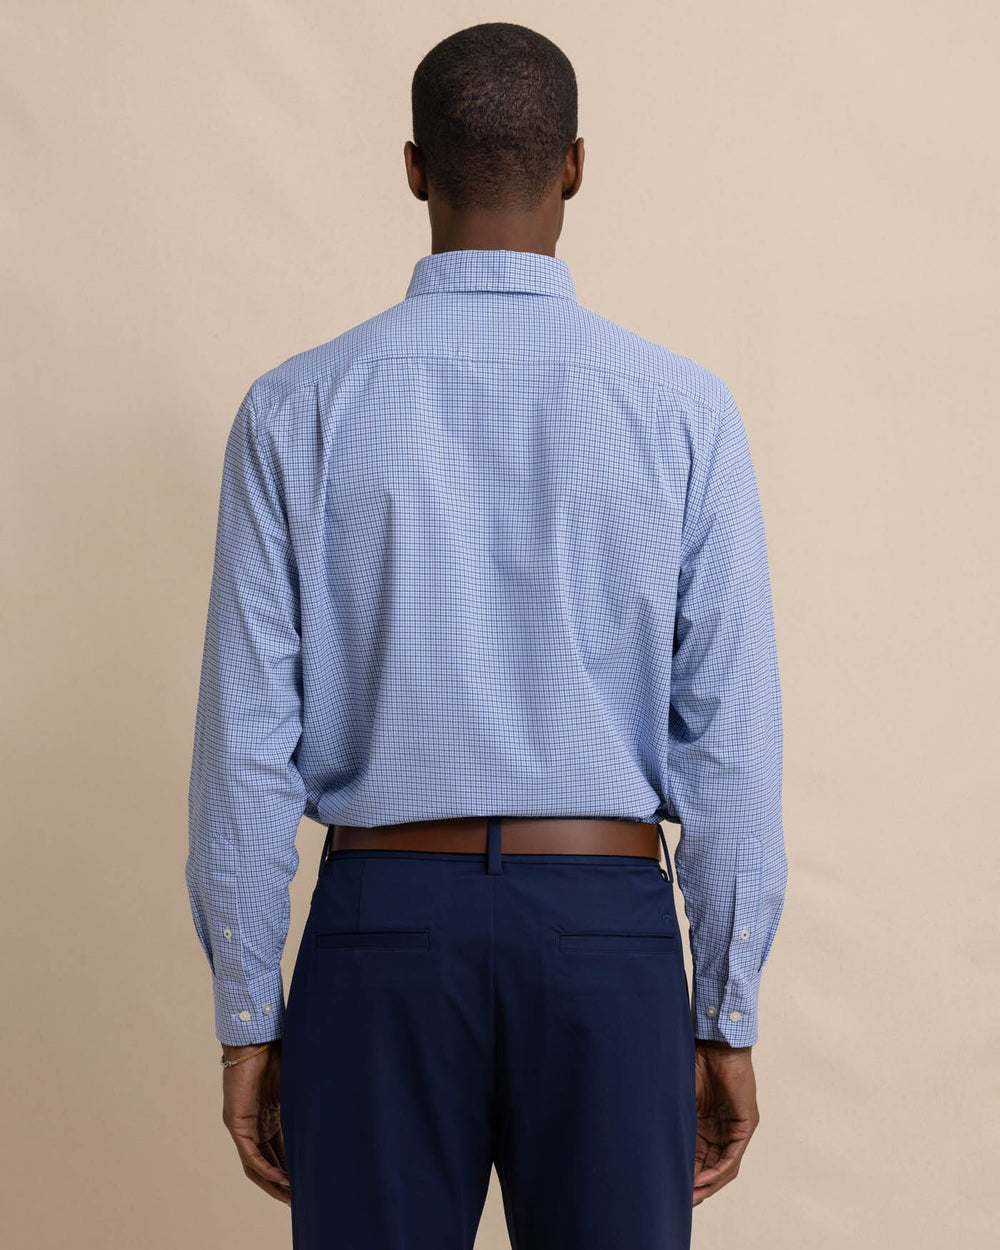 The back view of the Southern Tide Bowry brrr°® Intercoastal Sport Shirt by Southern Tide - Seven Seas Blue